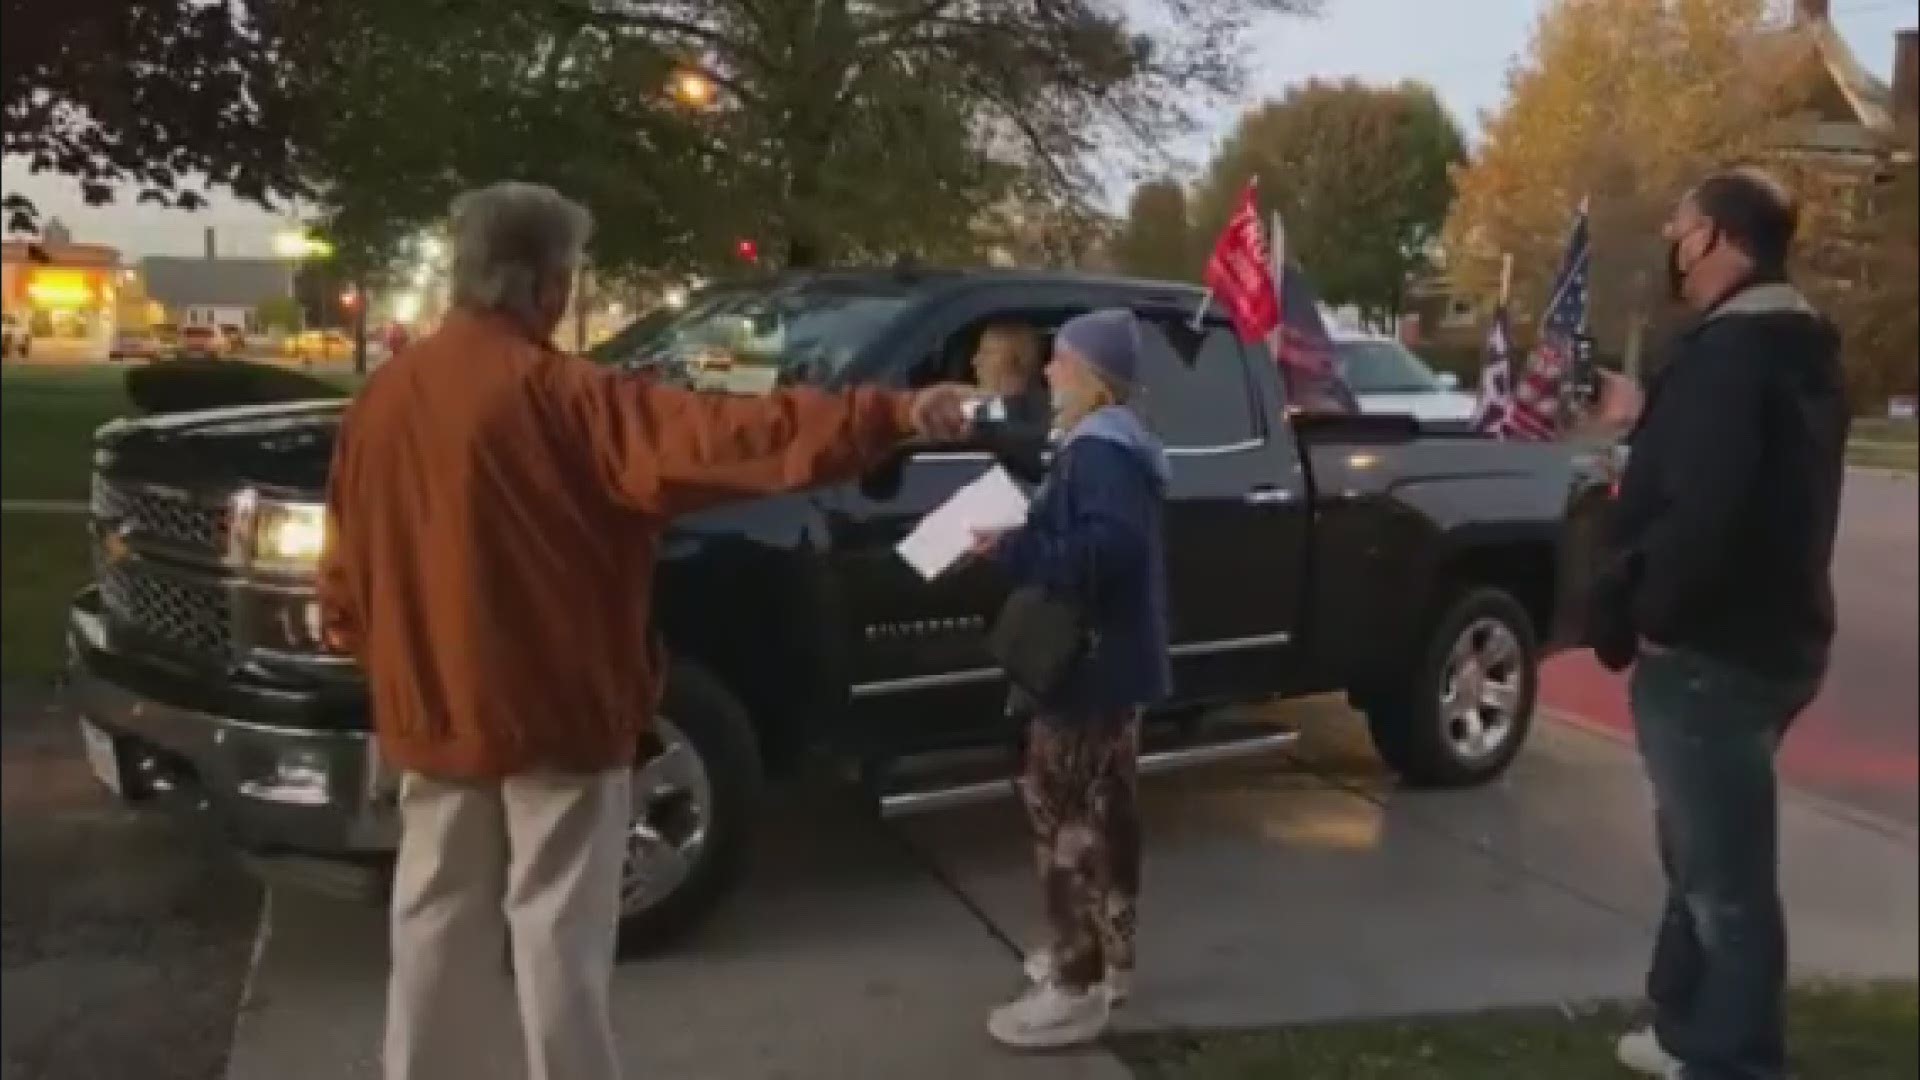 For about 15 minutes, a pickup truck was stopped in the driveway of a Findlay polling location on election night